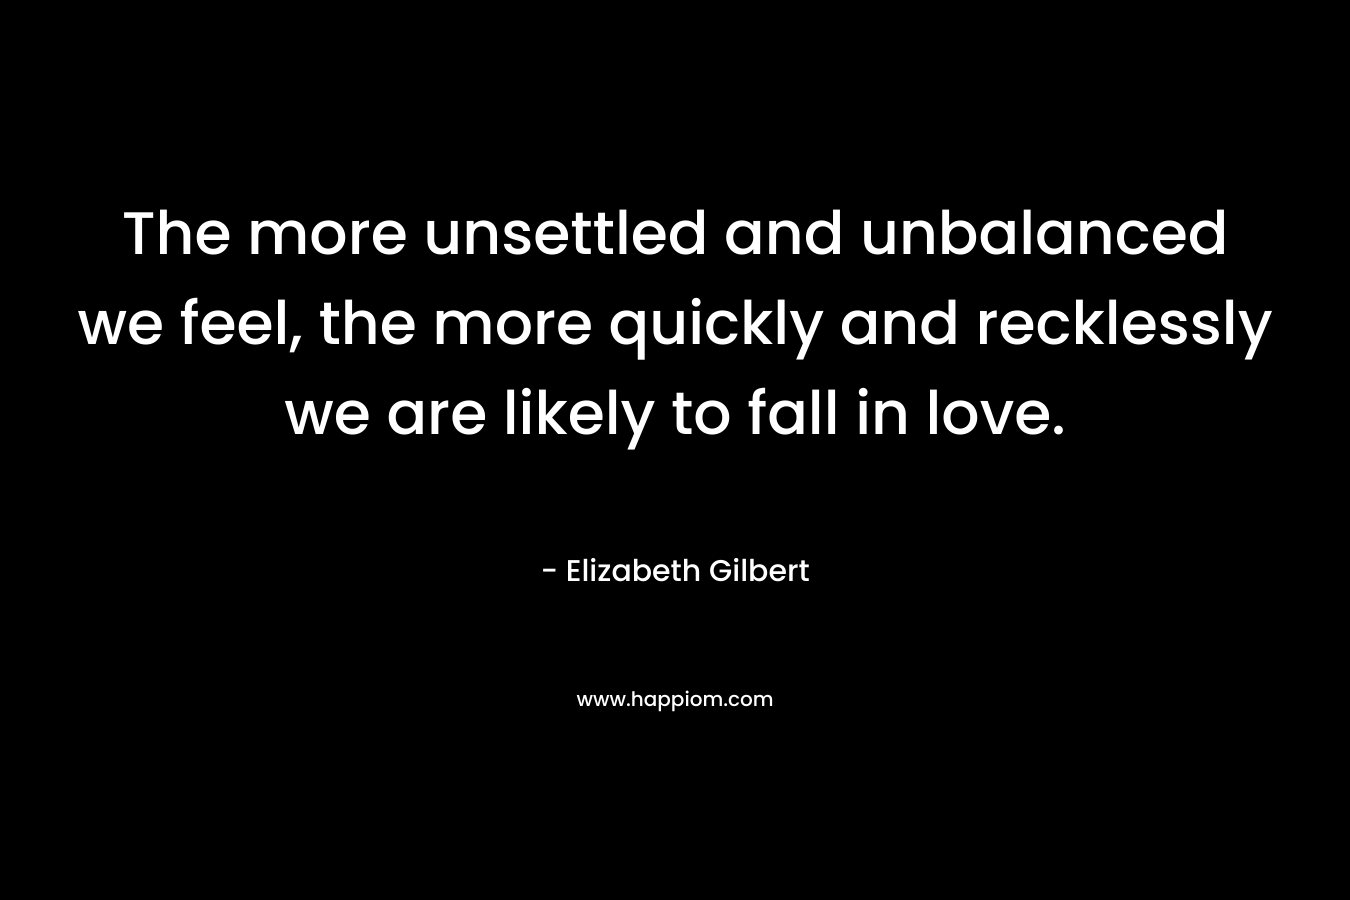 The more unsettled and unbalanced we feel, the more quickly and recklessly we are likely to fall in love. – Elizabeth Gilbert